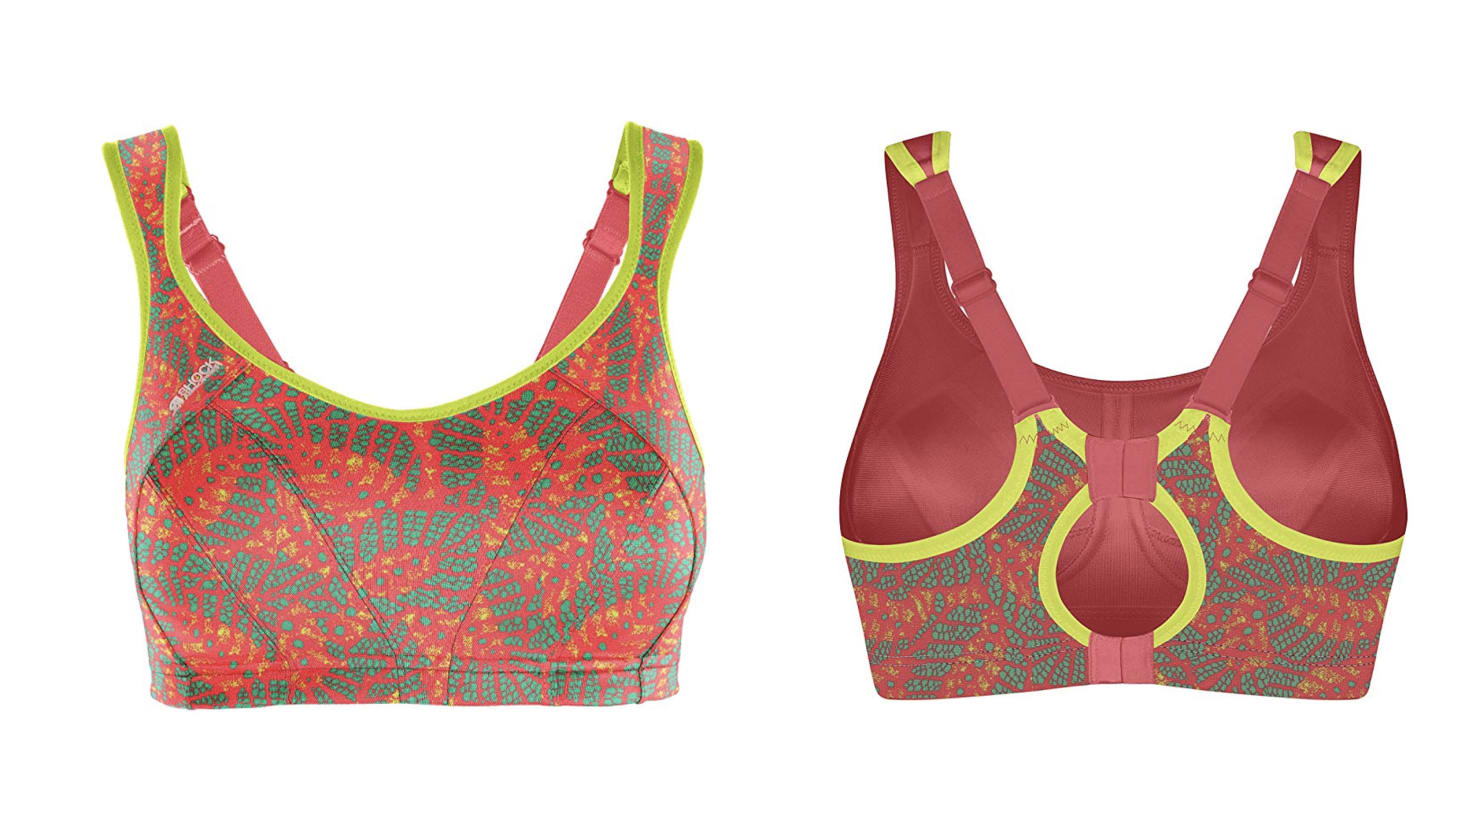 I Upped My Workout Game Thanks To These Awesome Shock Absorber Sports Bras  — Here's Why